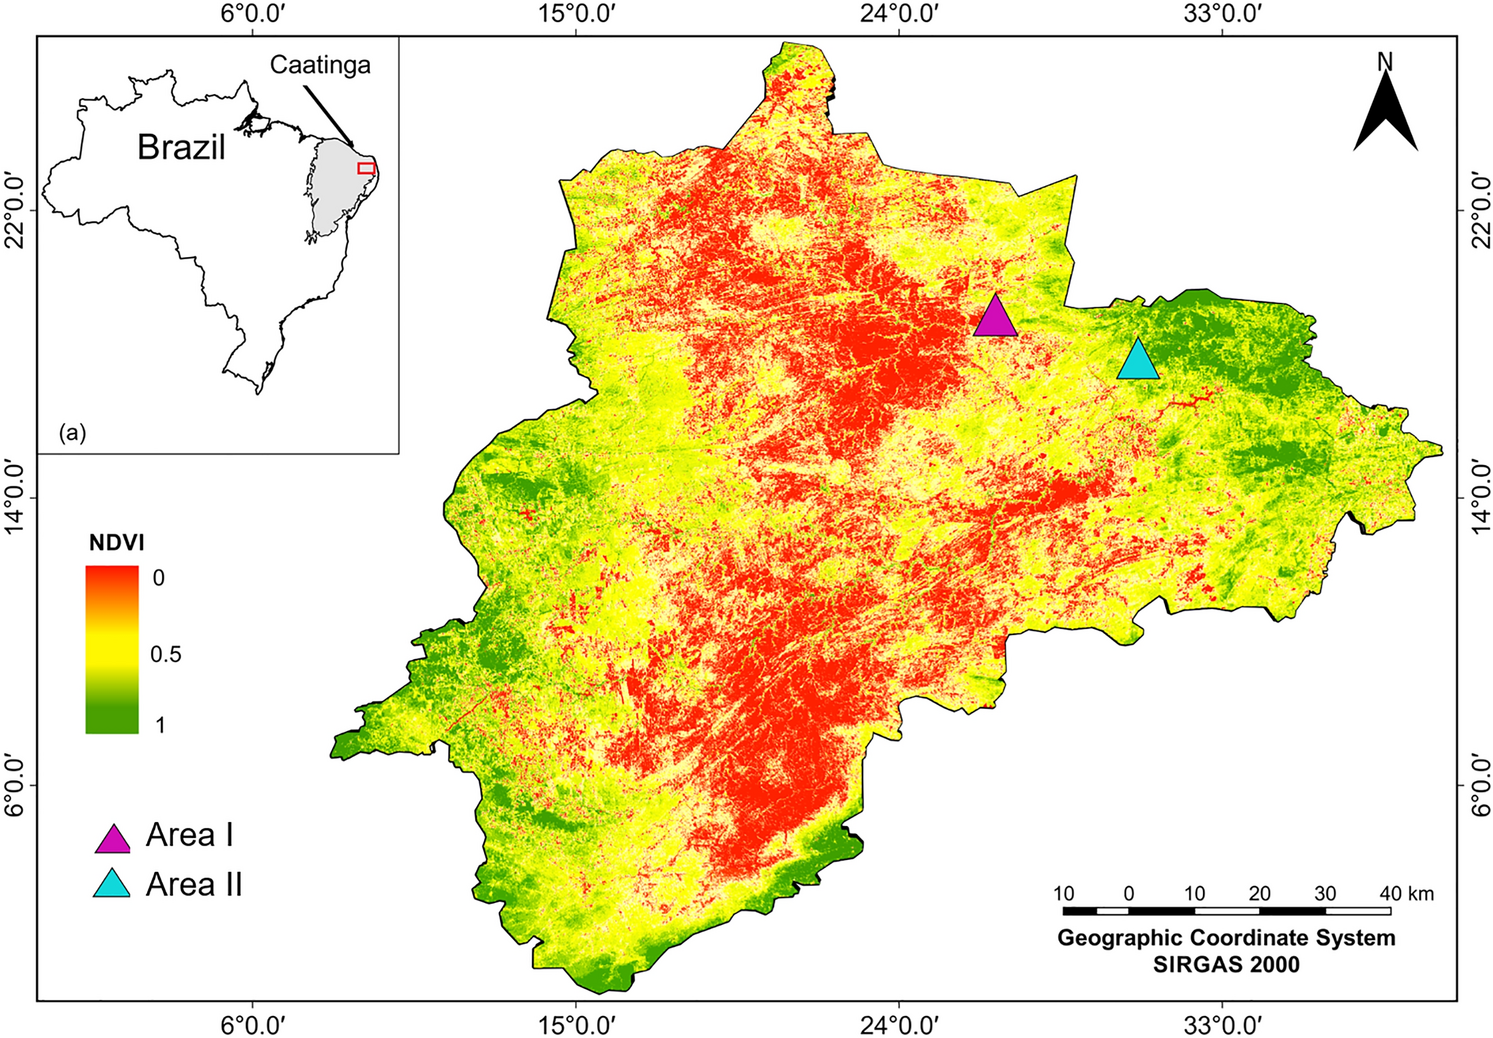 Vegetation cover and seasonality as indicators for selection of forage  resources by local agro-pastoralists in the Brazilian semiarid region